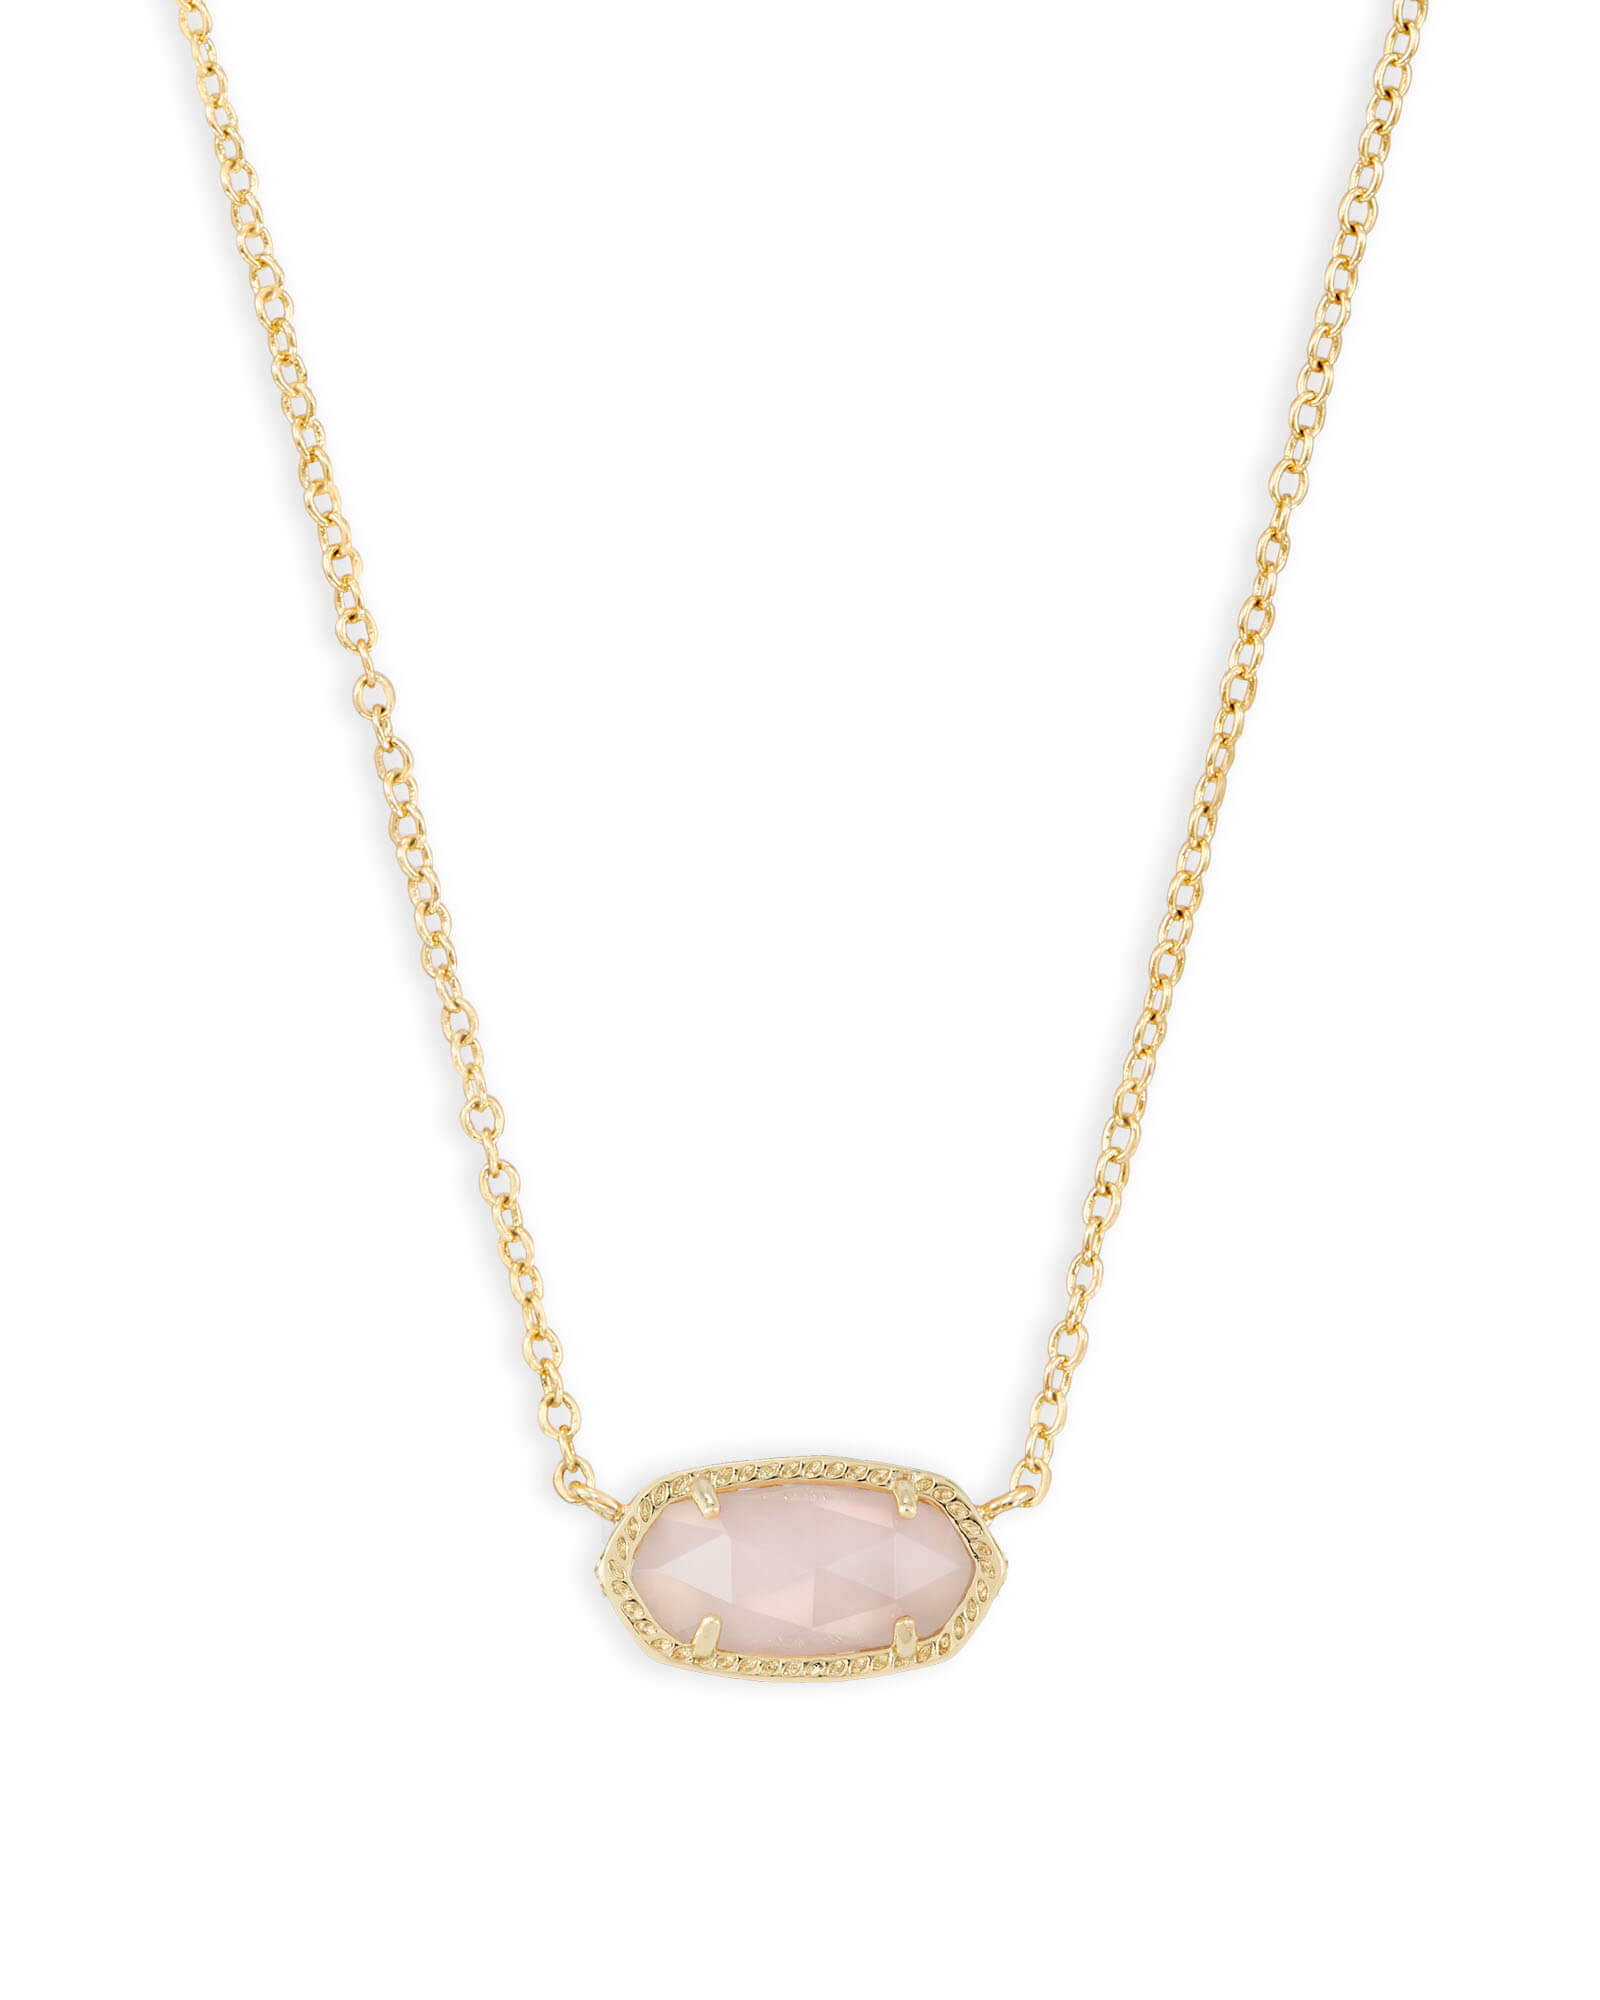 Kendra Scott Elisa Oval Pendant Necklace in Iridescent Drusy and Gold | eBay